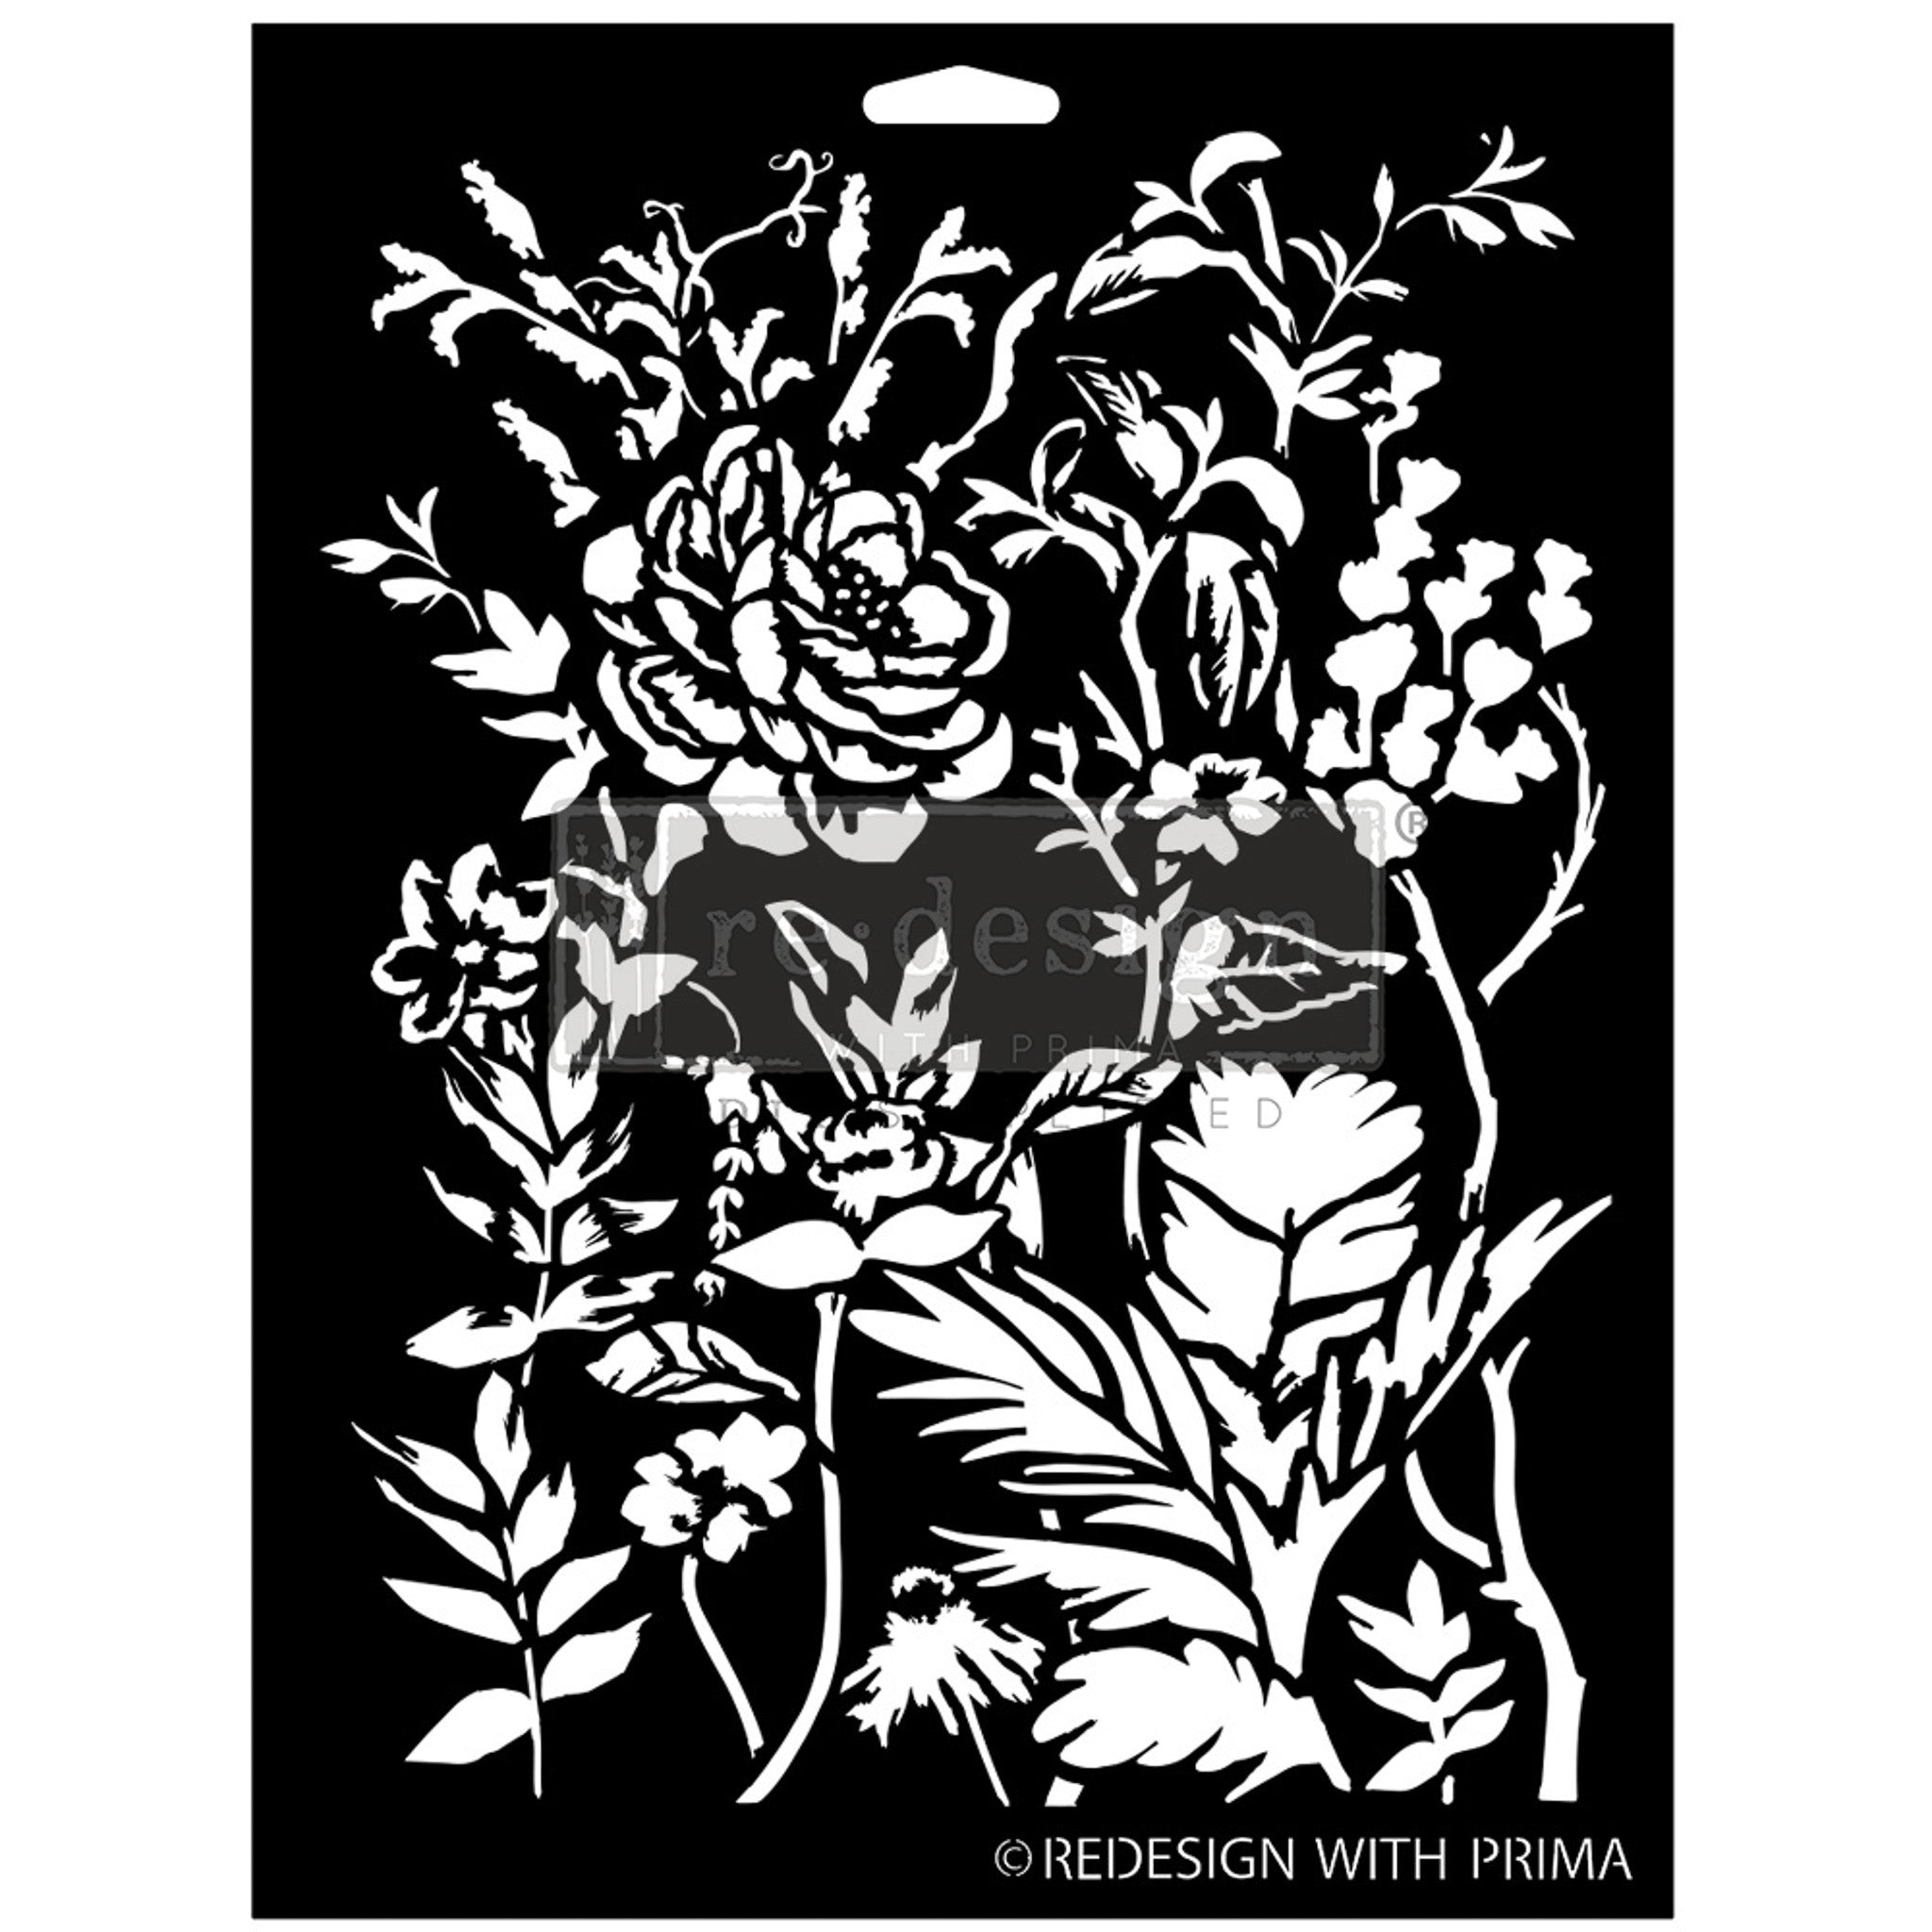 A black stencil against a white background of a delicate floral design that features small blossoms and large roses.